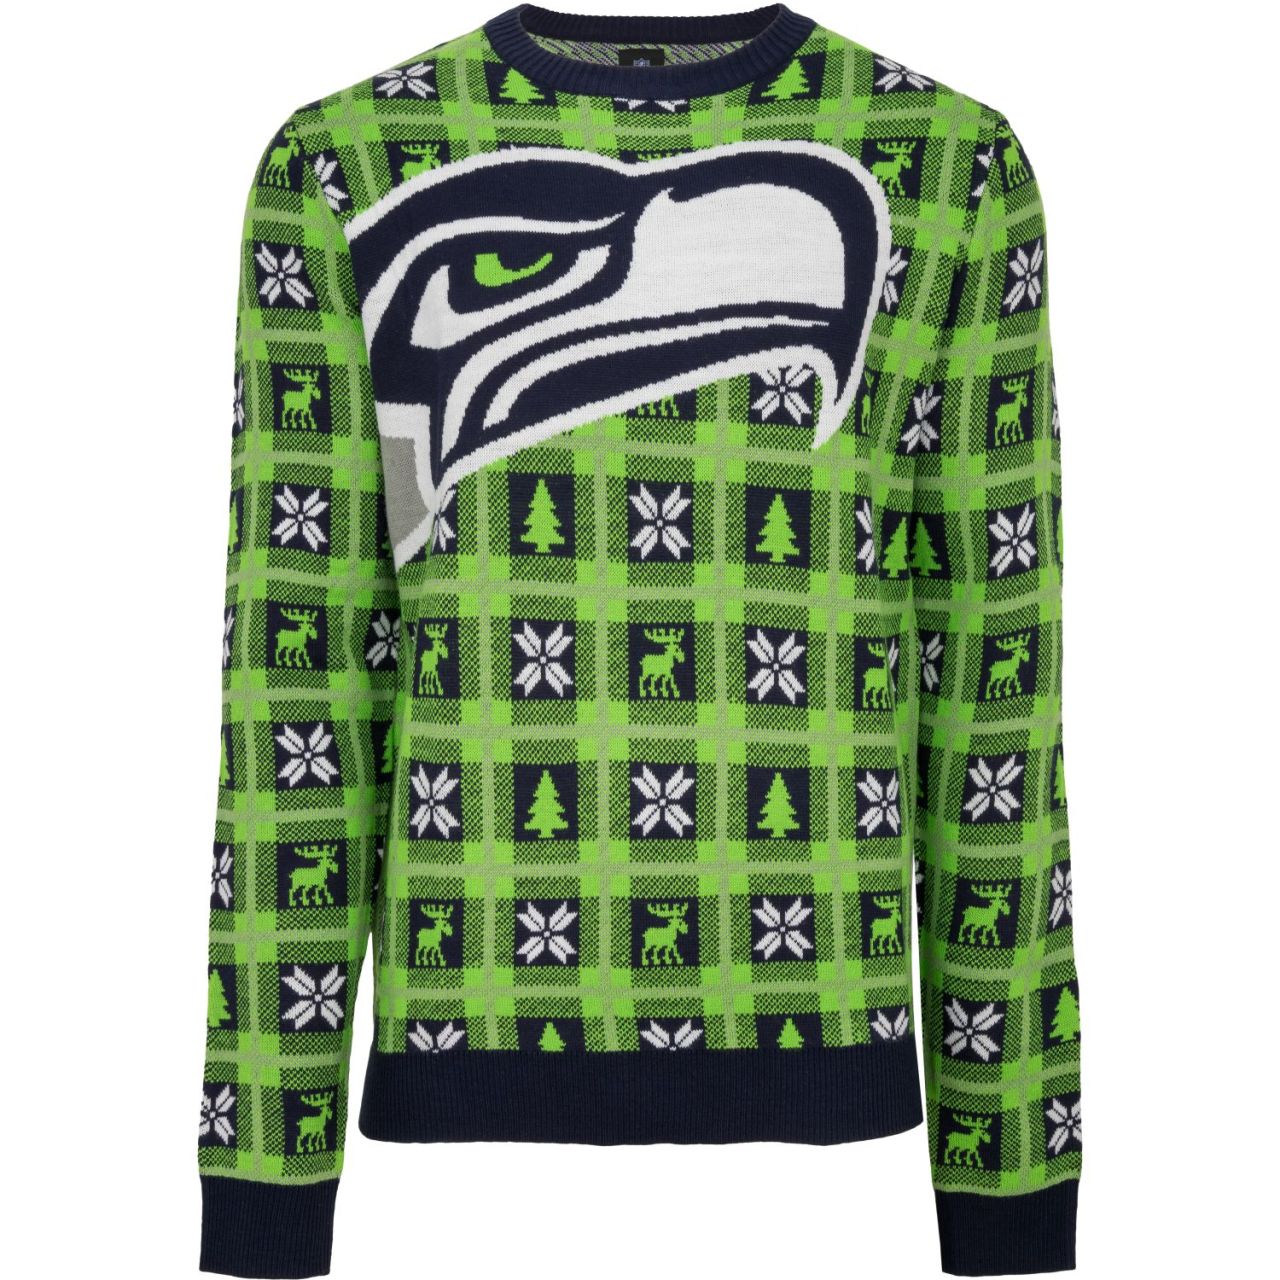 NFL Ugly Sweater XMAS Strick Pullover - Seattle Seahawks von FOCO